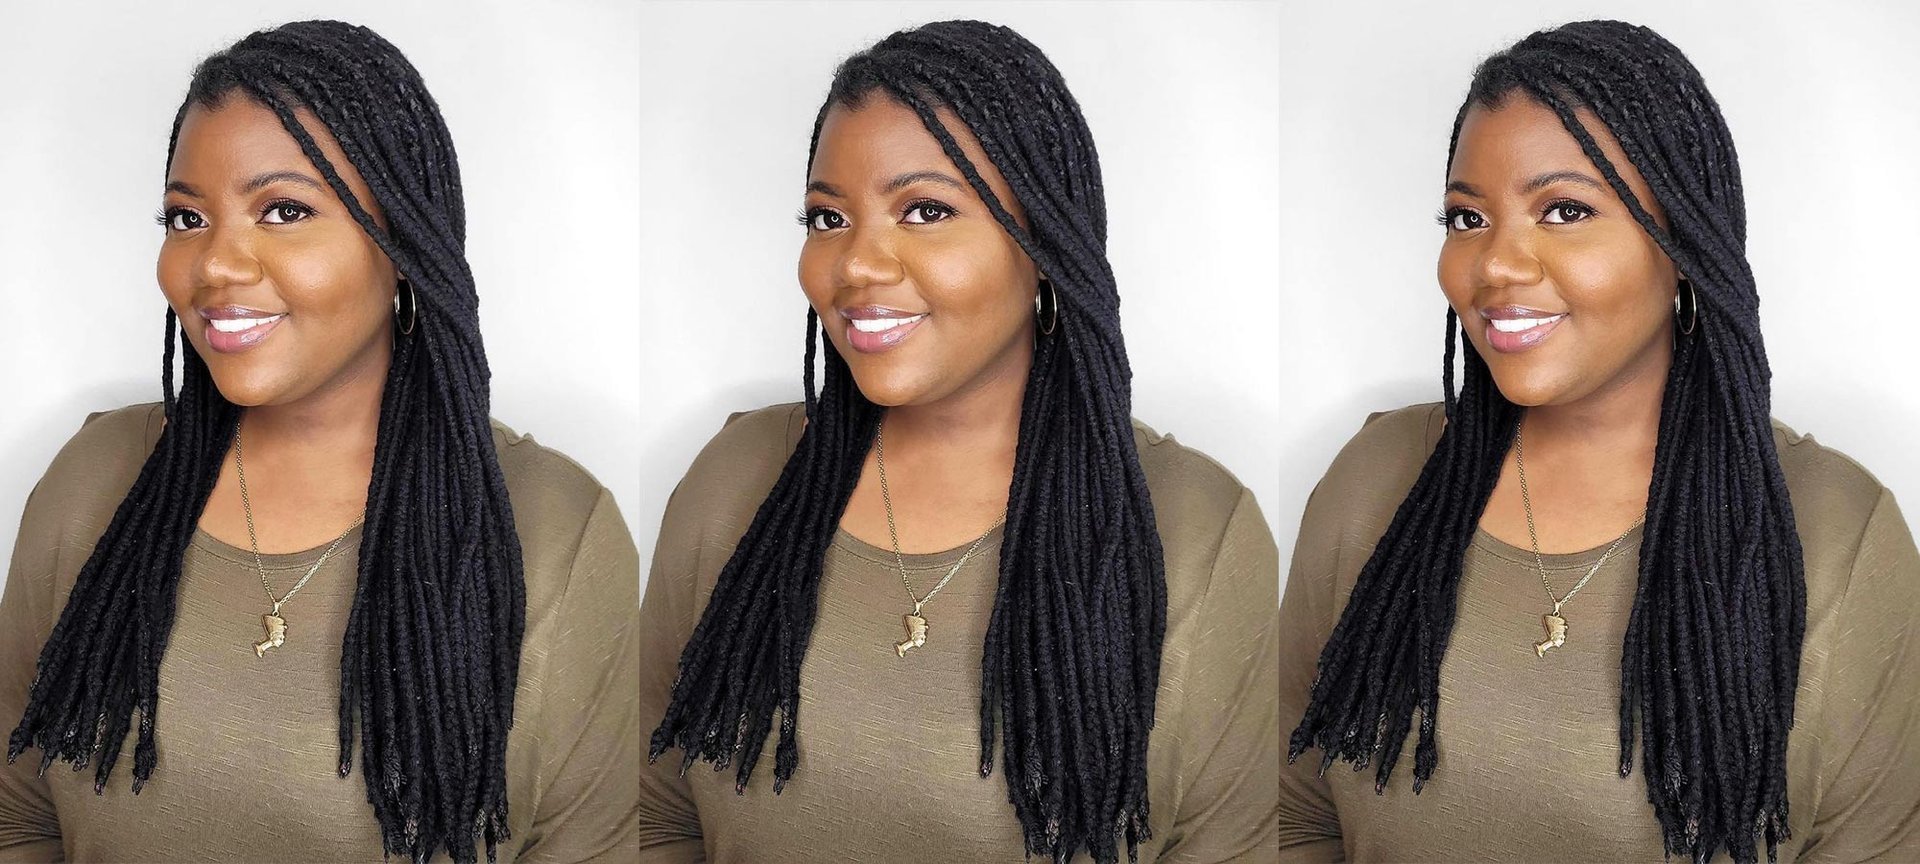 Amazing Ombre Braids Like You've Never Seen Them Before